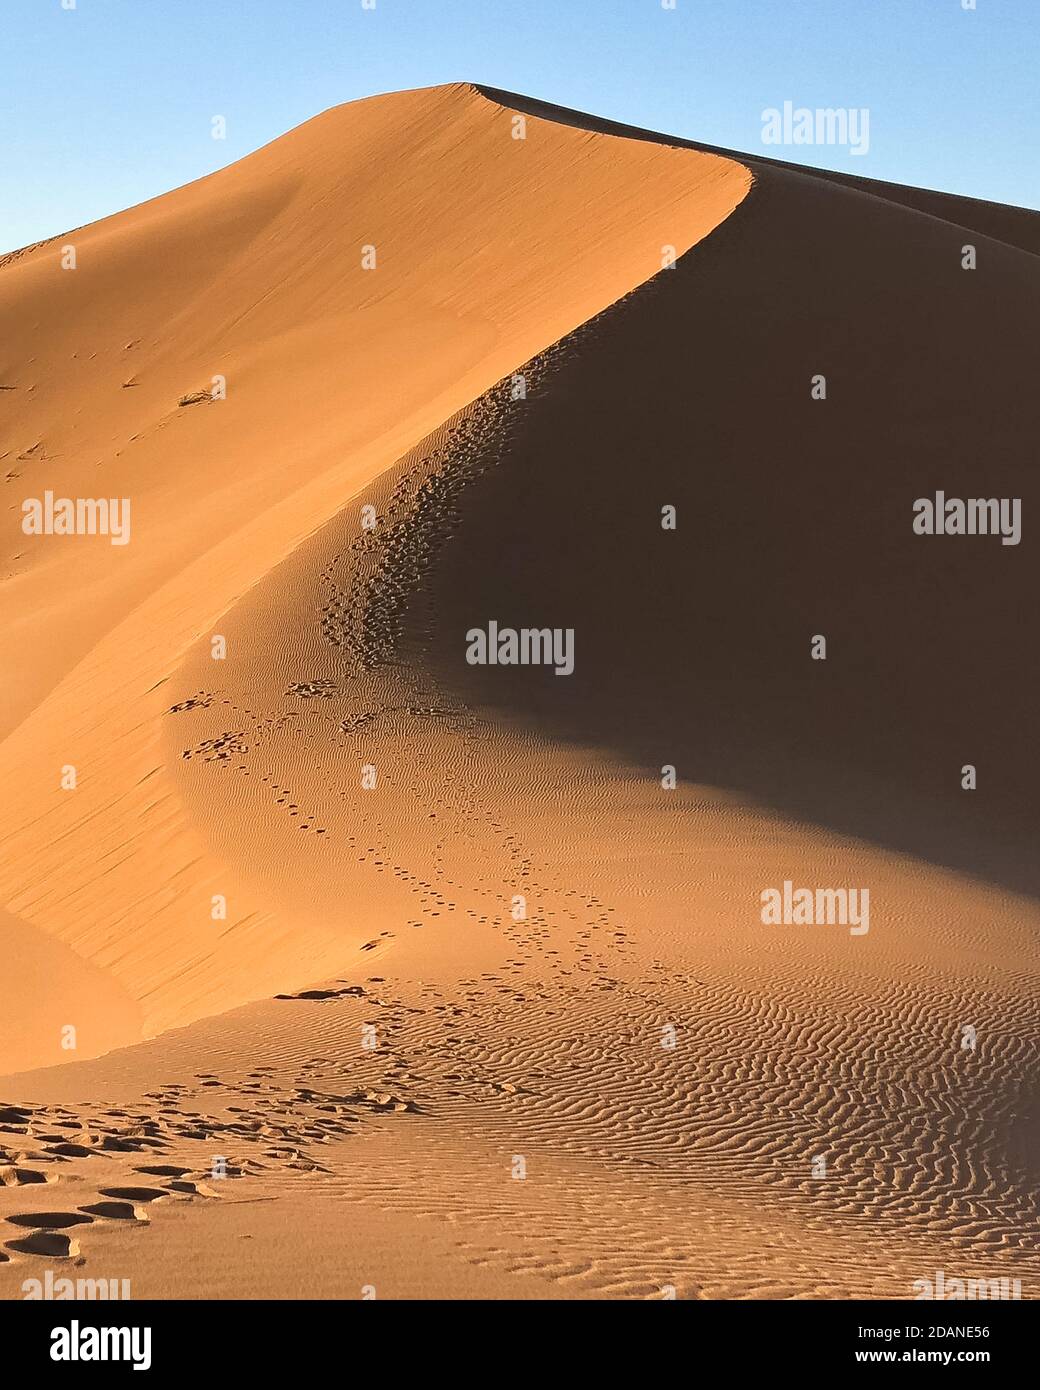 Huge desert dune at Erg Chigaga, at the gates of the Sahara. Morocco. Concept of travel and adventure. Stock Photo